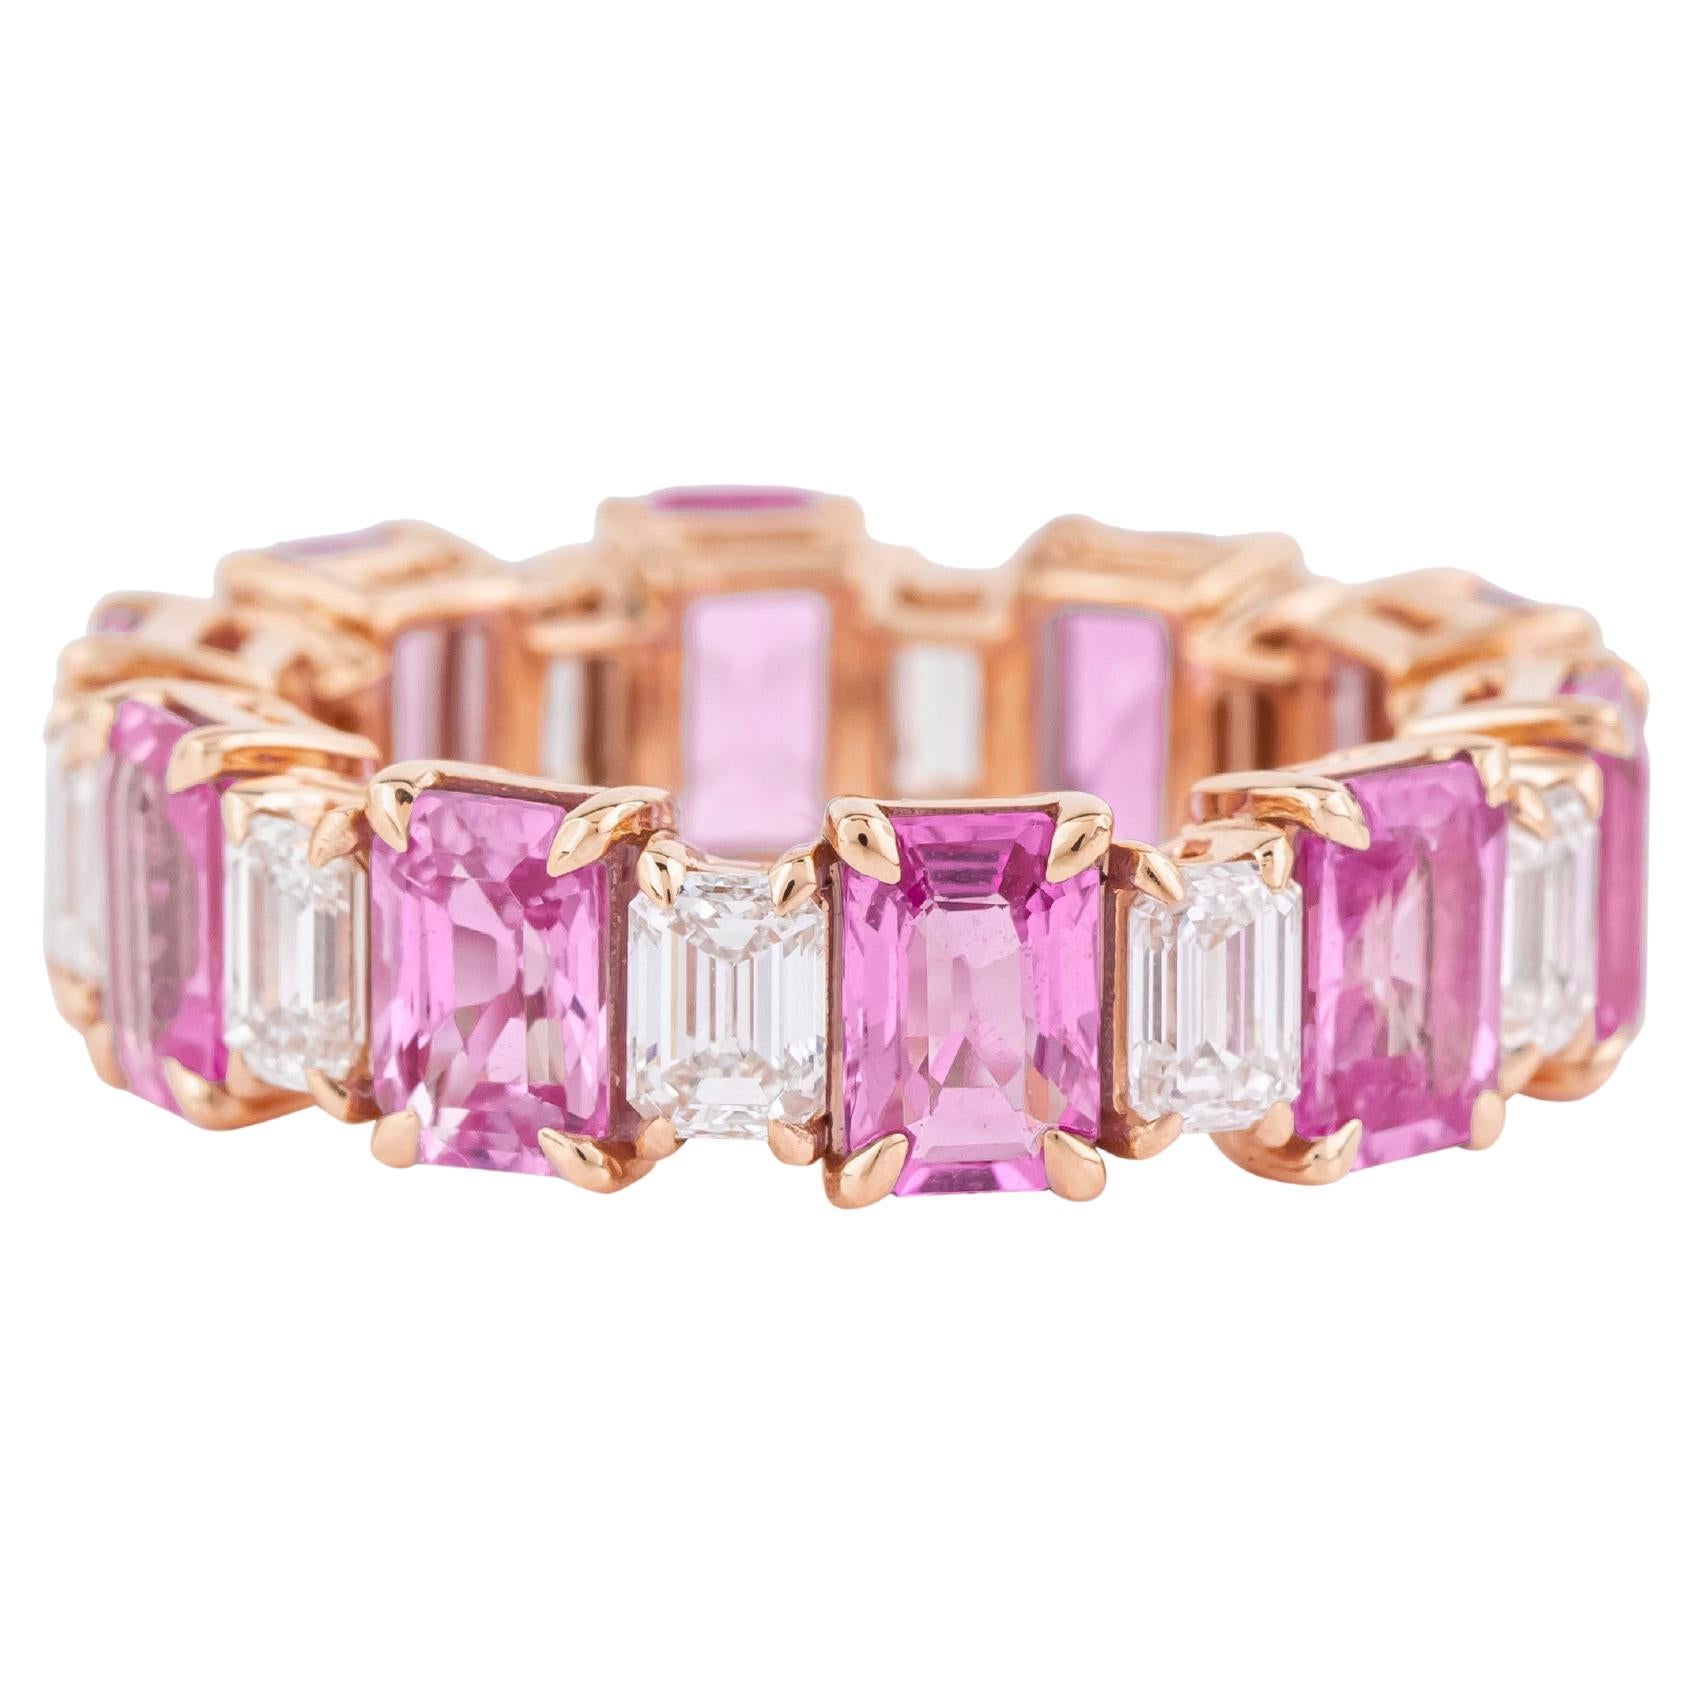 18 Karat Gold 8.81 Carat Diamond and Pink Sapphire Eternity Band Ring For Sale